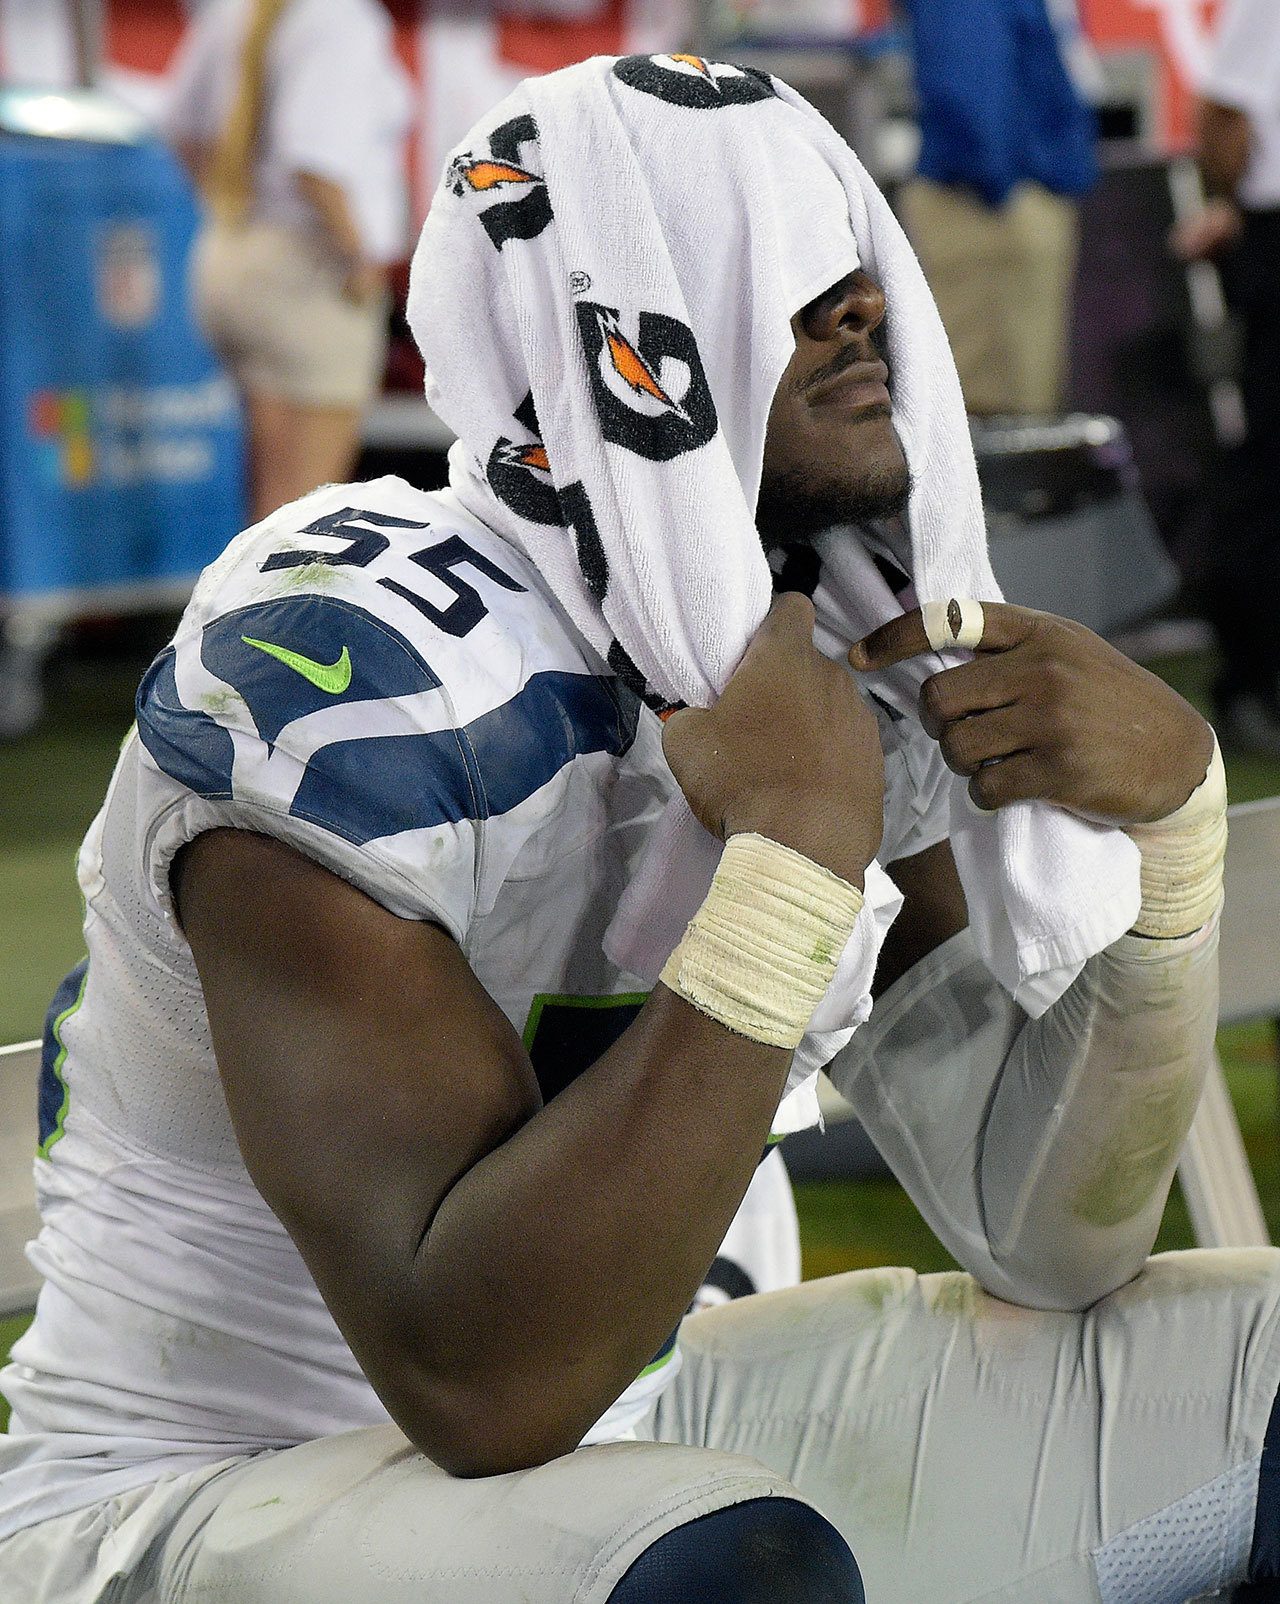 Seahawks defensive end Frank Clark reacts during the final seconds of the Seahawks’ loss to the Buccaneers on Sunday in Tampa, Florida. (AP Photo/Phelan M. Ebenhack)